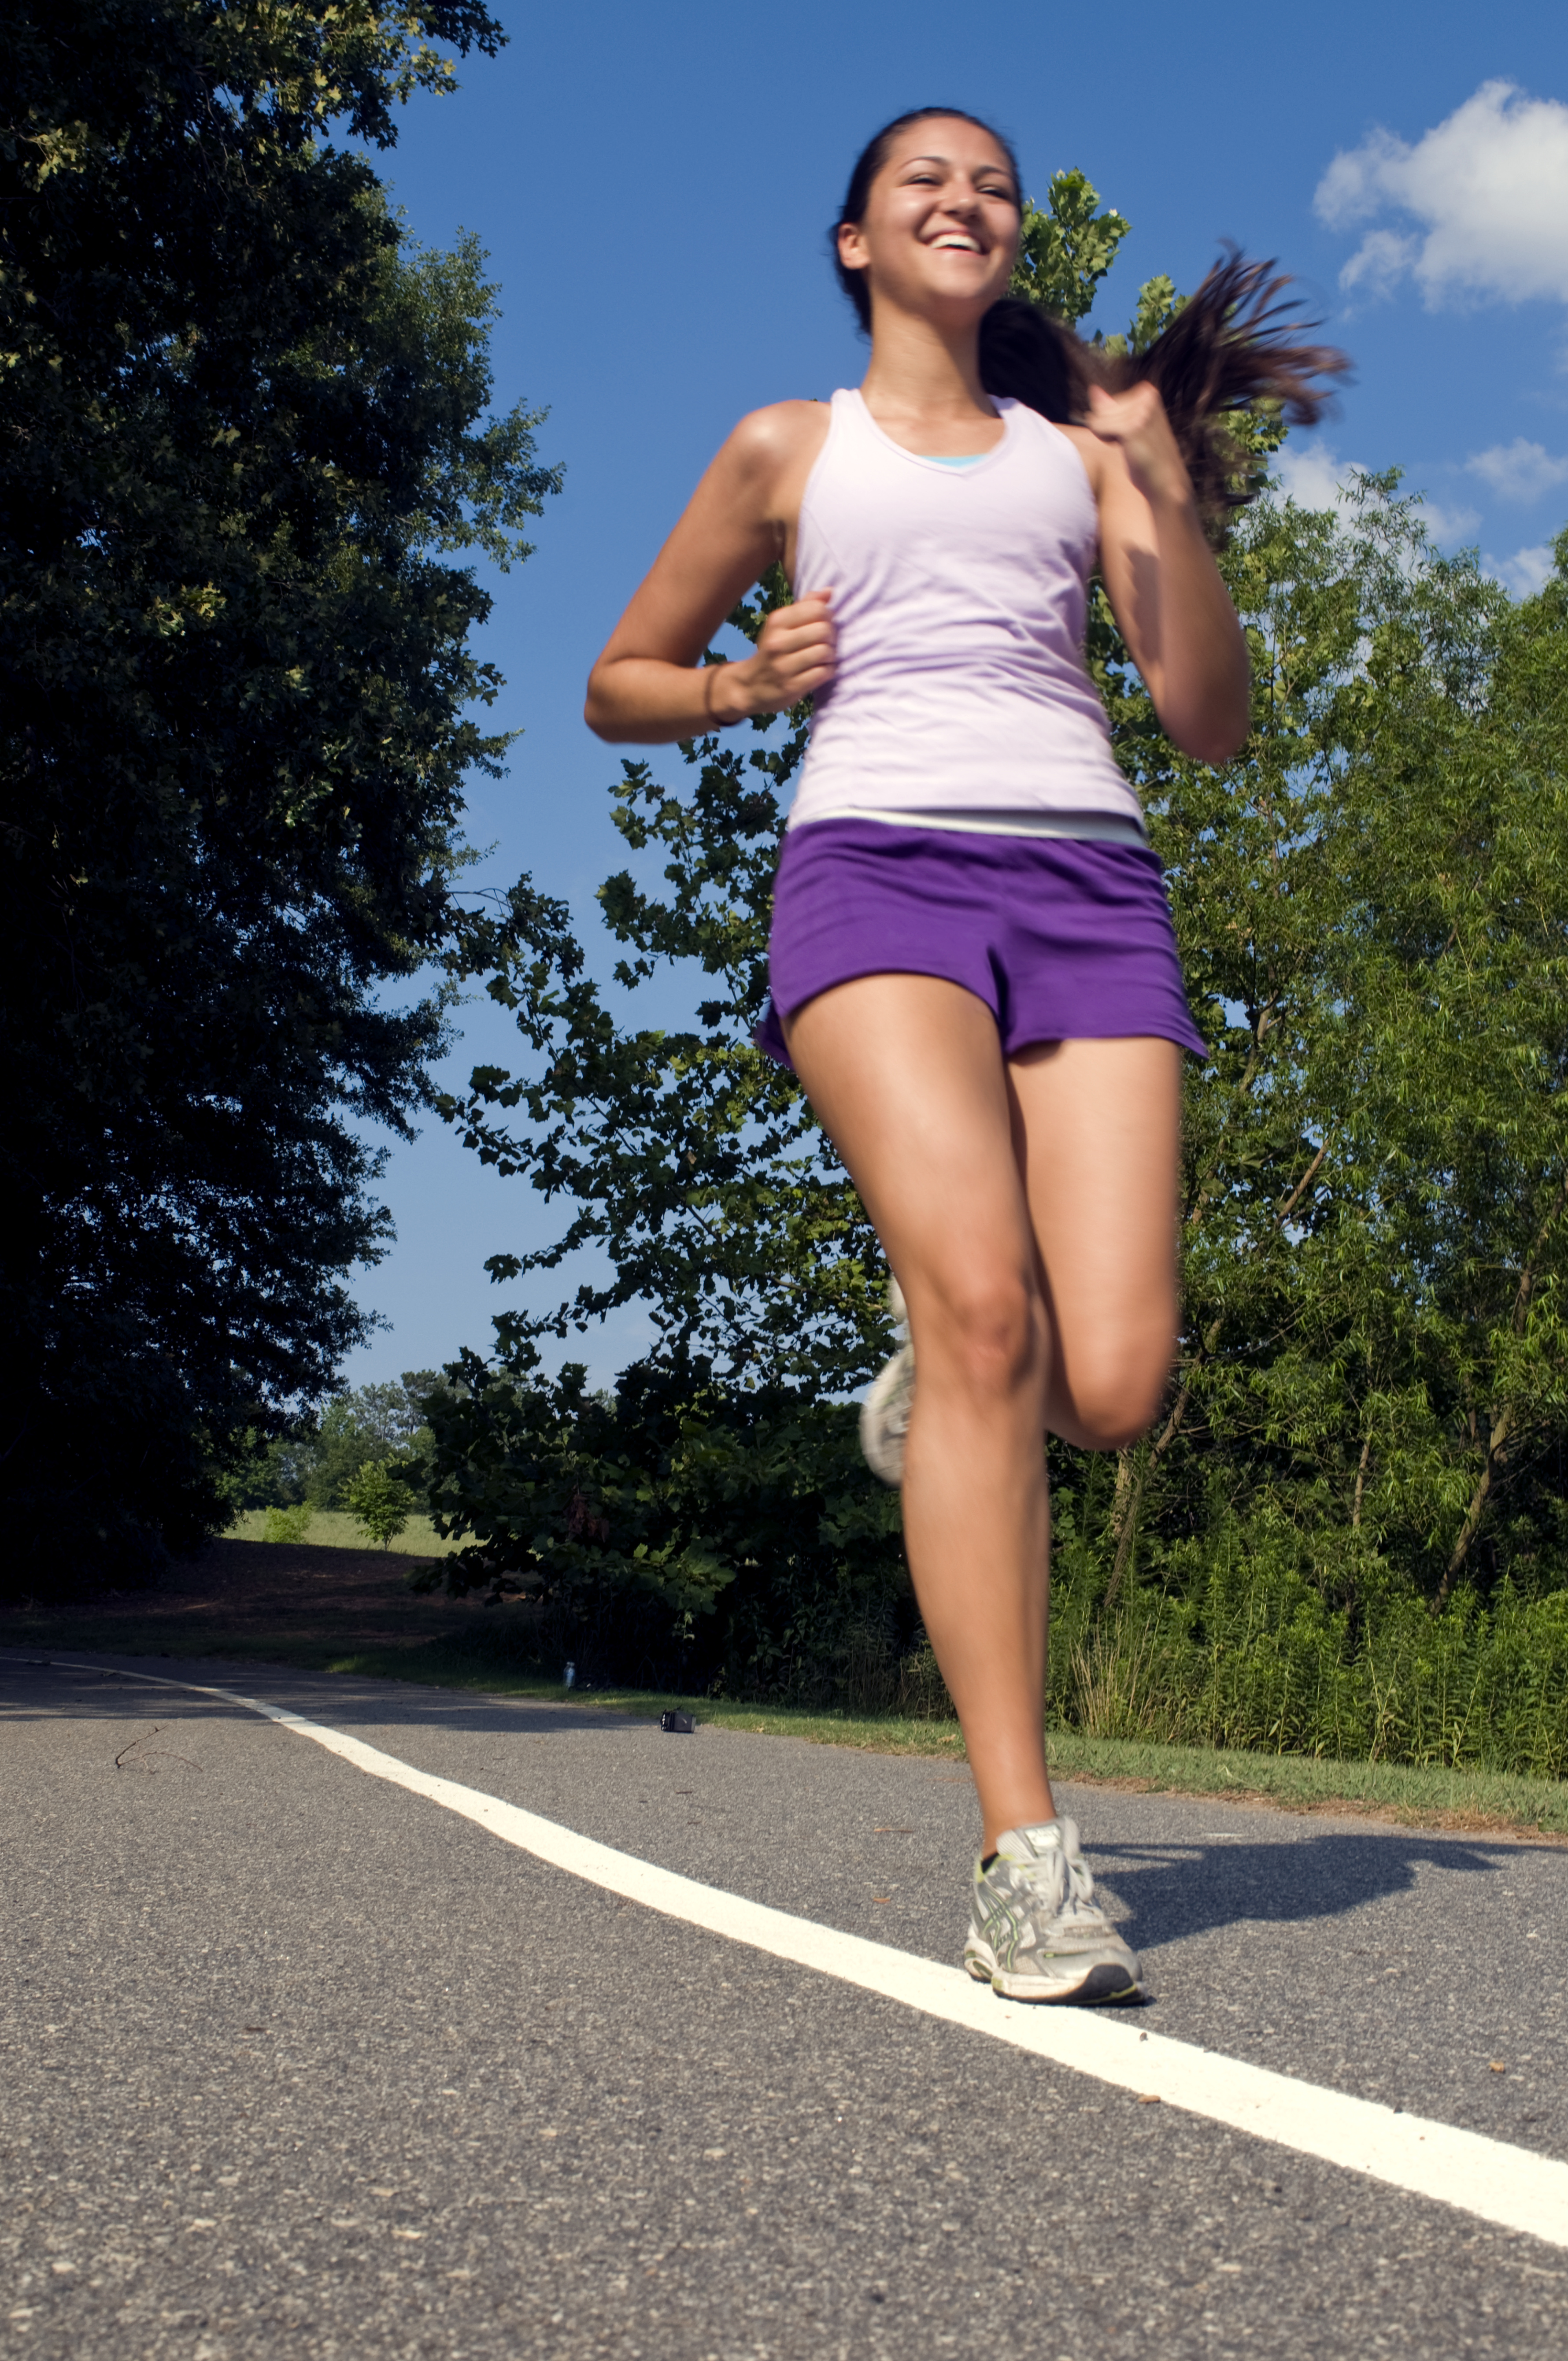 A young woman jogging outdoors